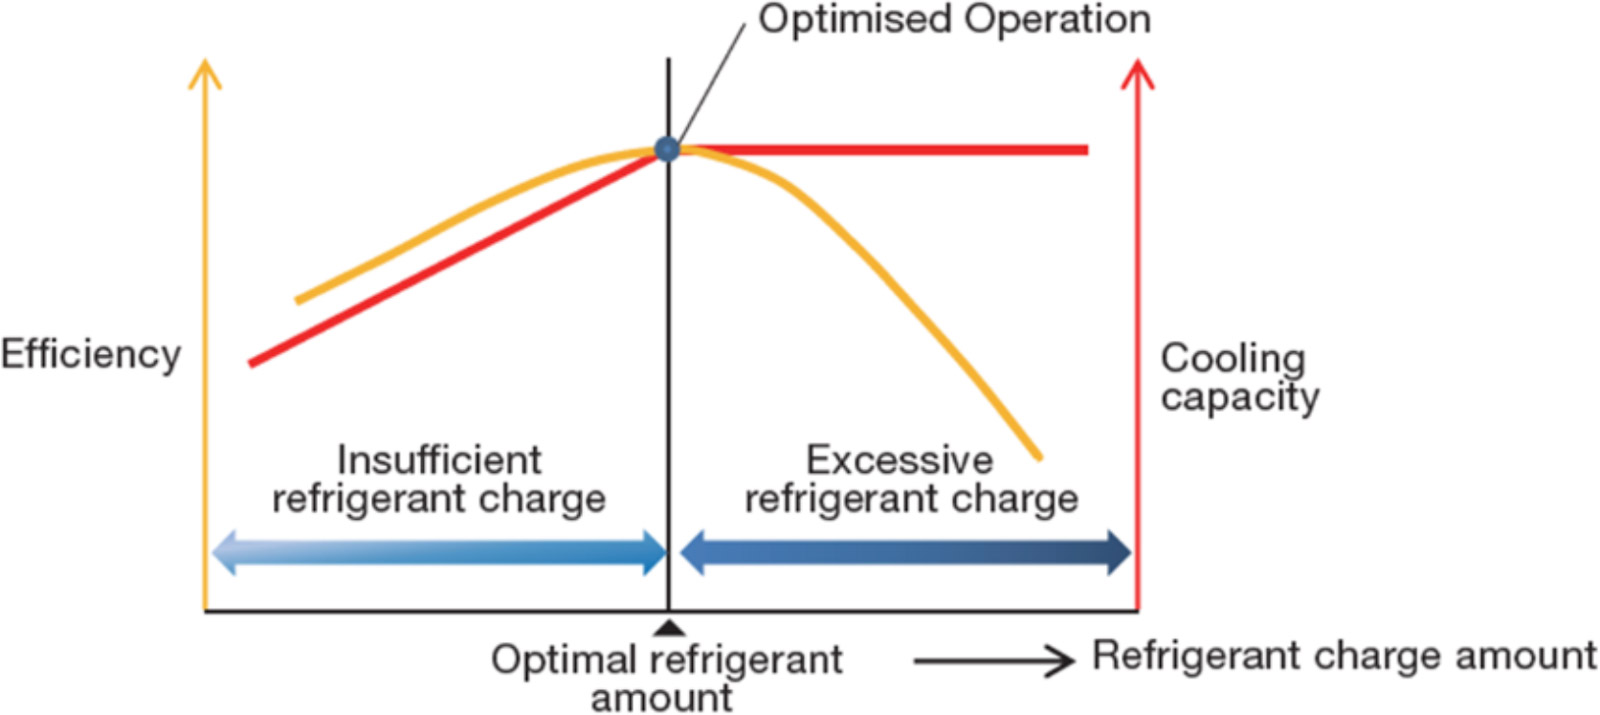 Automatic Refrigerant Charge Function